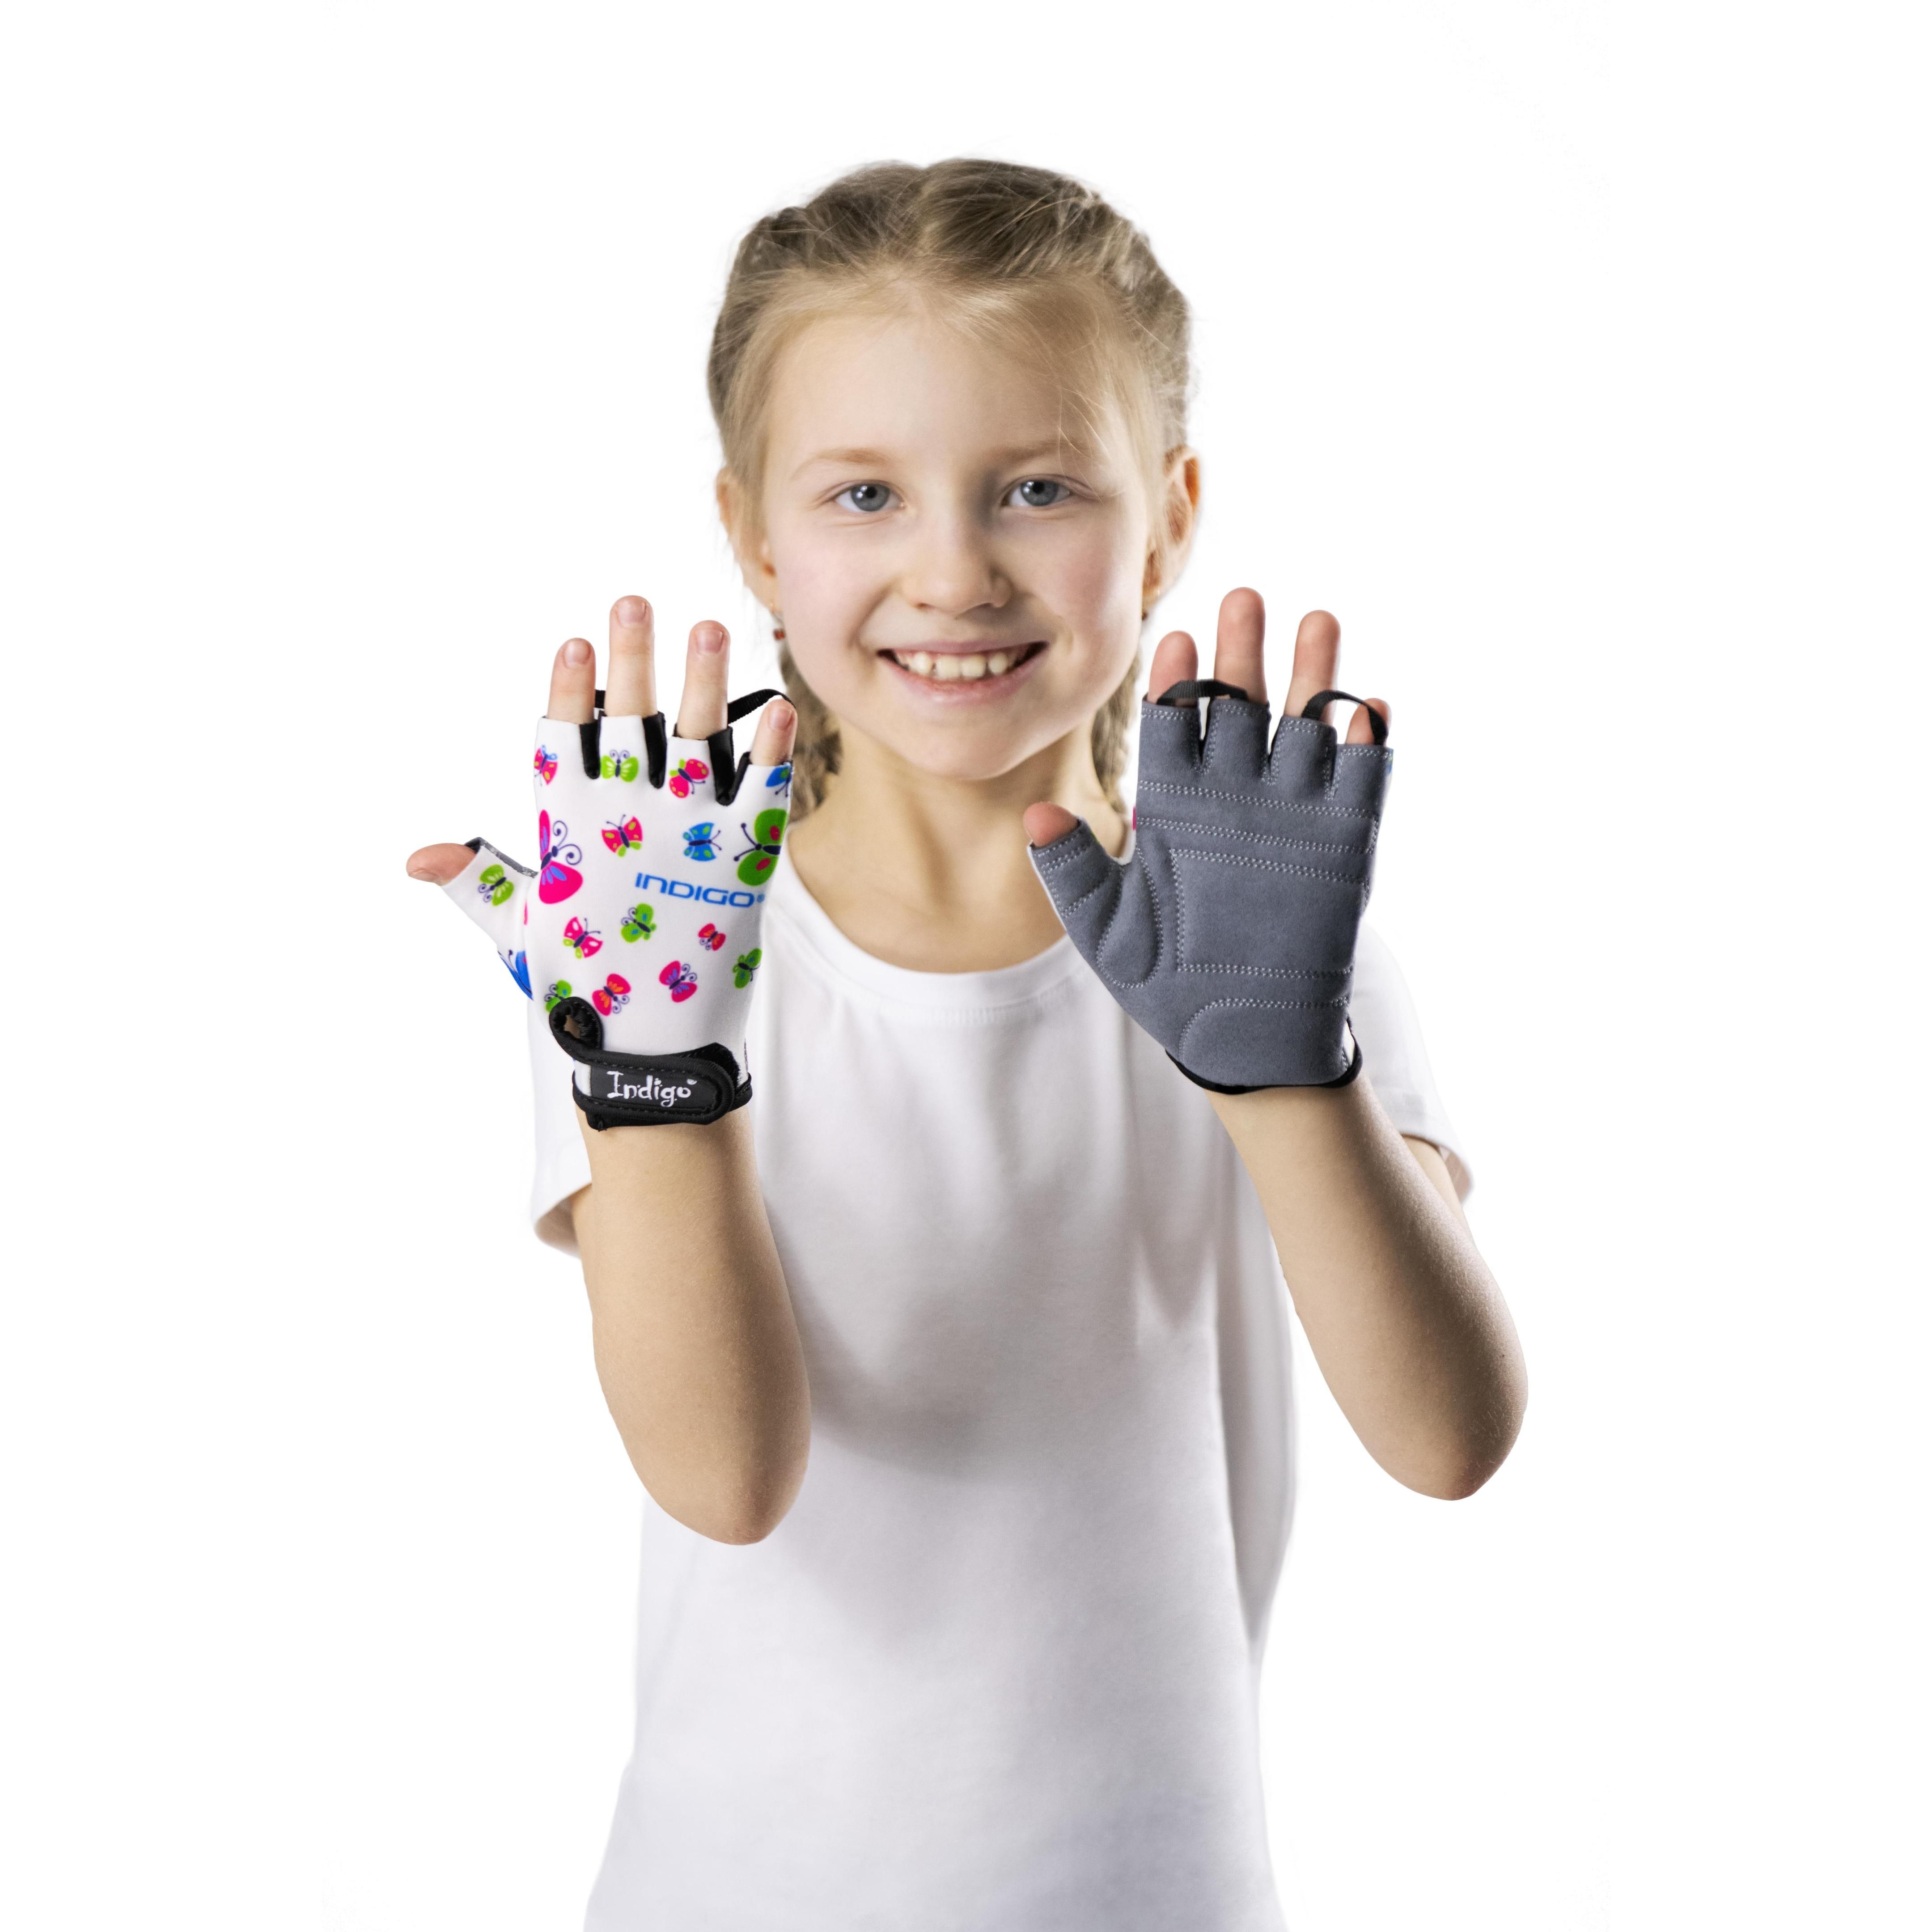 Guantes Ciclismo Infantil BUTTERFLY INDIGO Talle 3XS Blanco